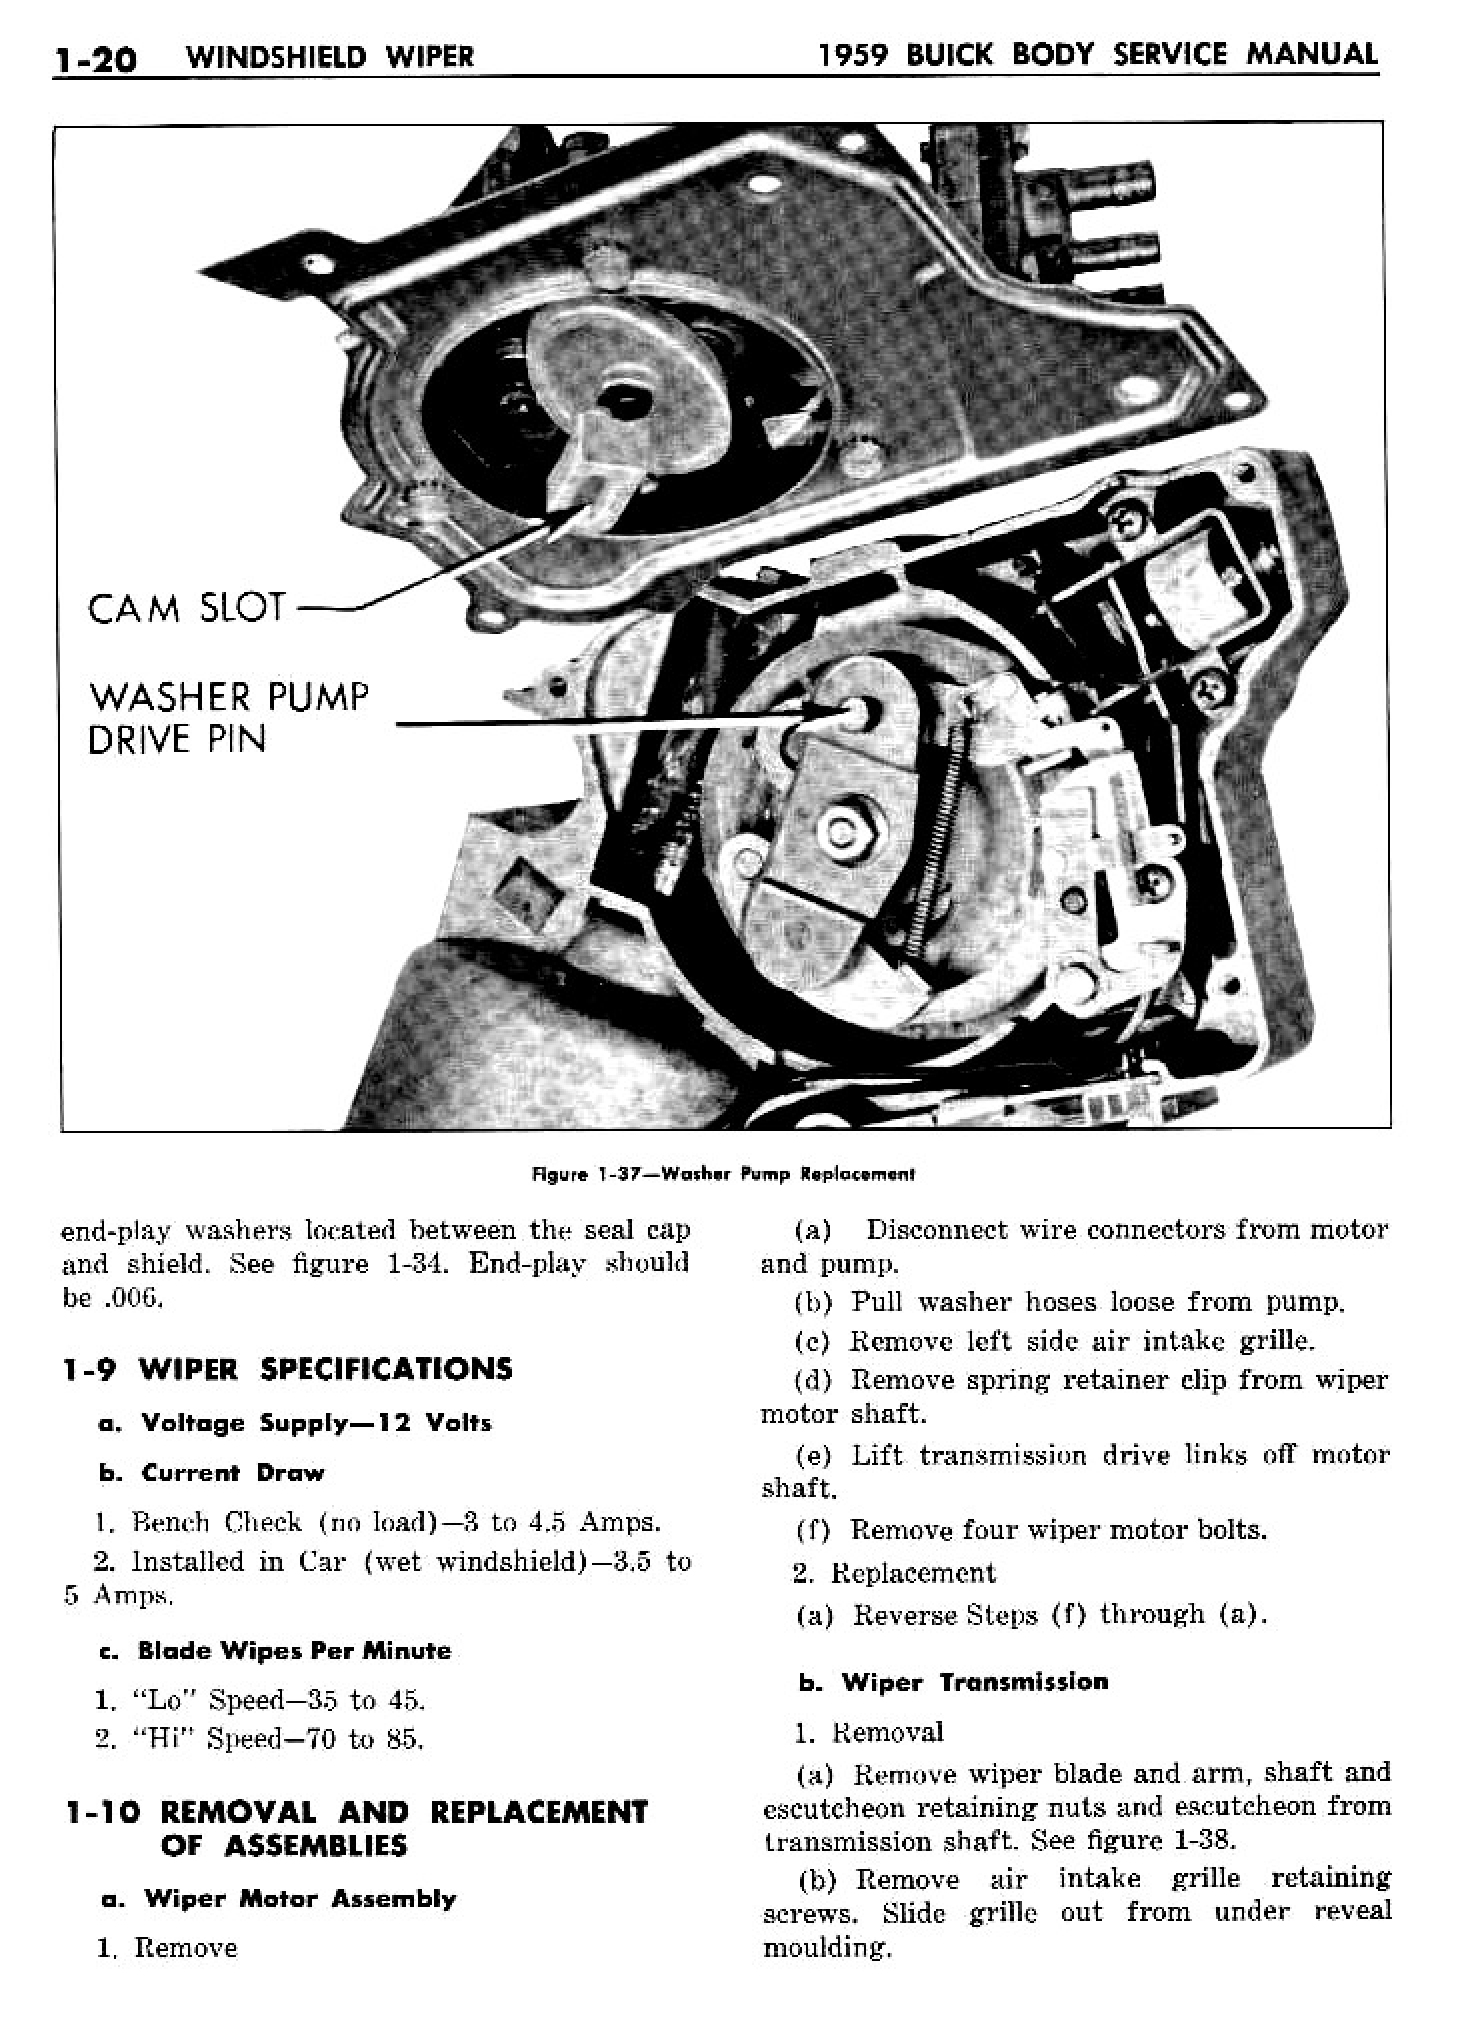 n_02 1959 Buick Body Service-Front End_20.jpg